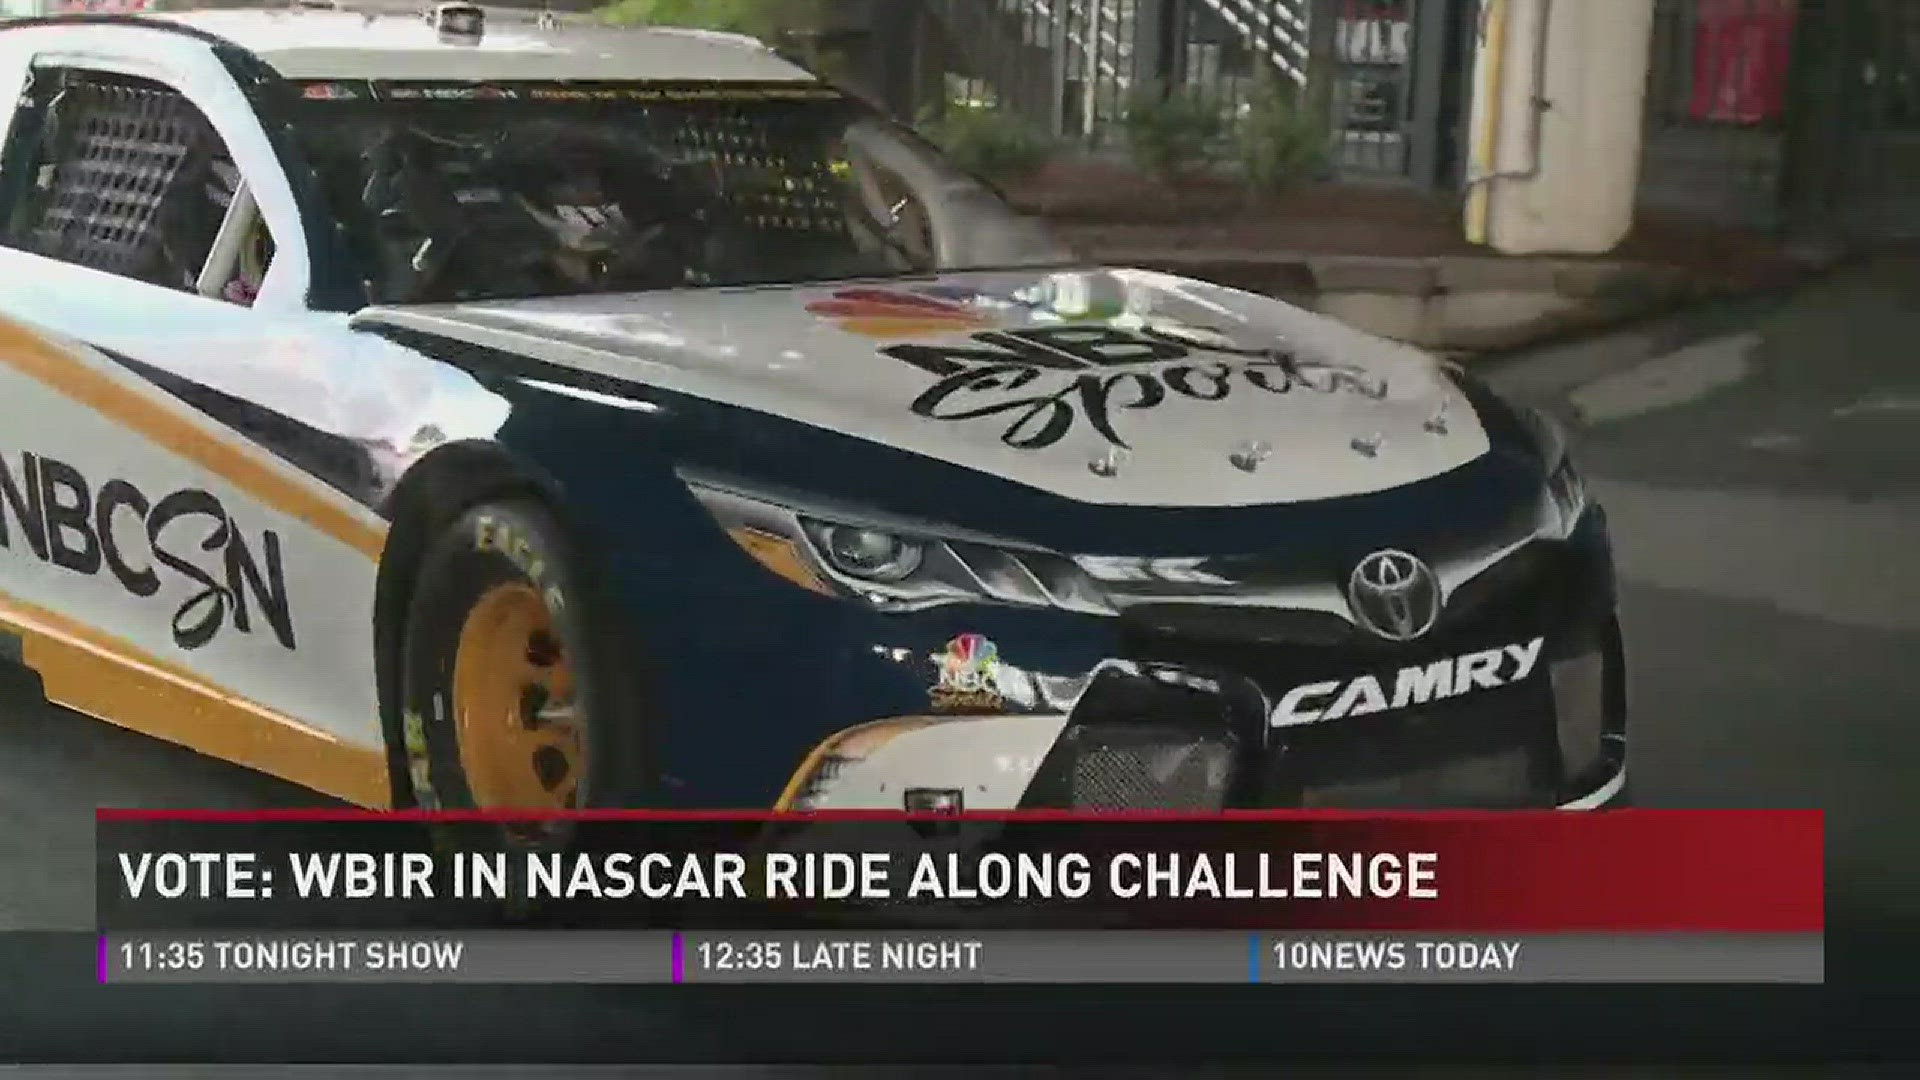 Nov. 15, 2016: NASCAR's NBC ride-along challenge is live! WBIR's Daniel Sechtin took a ride in the NBC sports car earlier this year. Now he needs your vote for the best ride along.